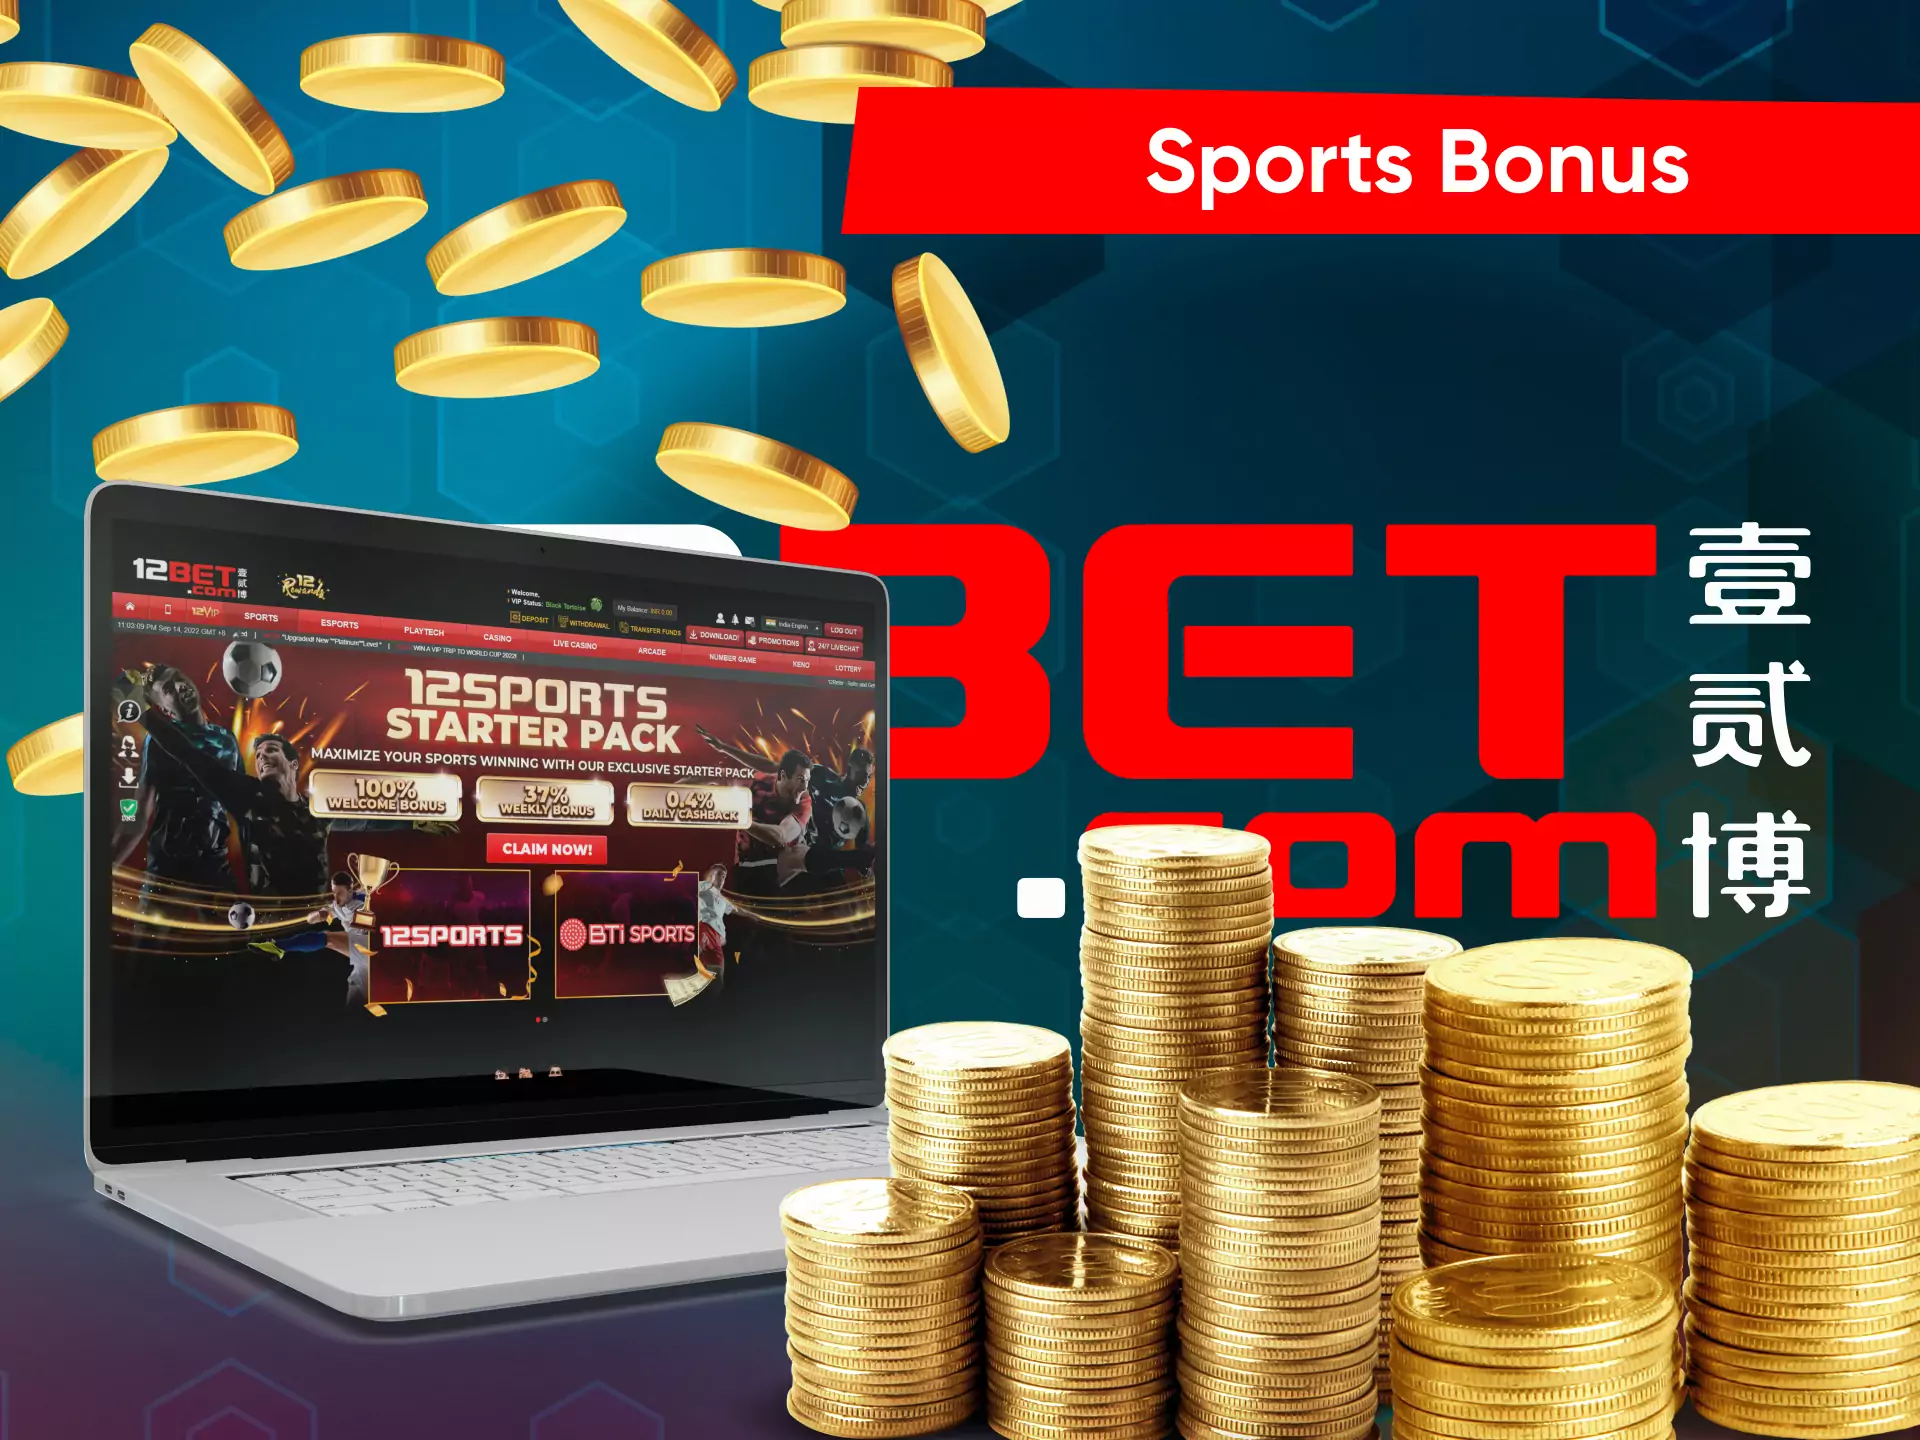 For sports fans, there is a special bonus offer from 12bet.